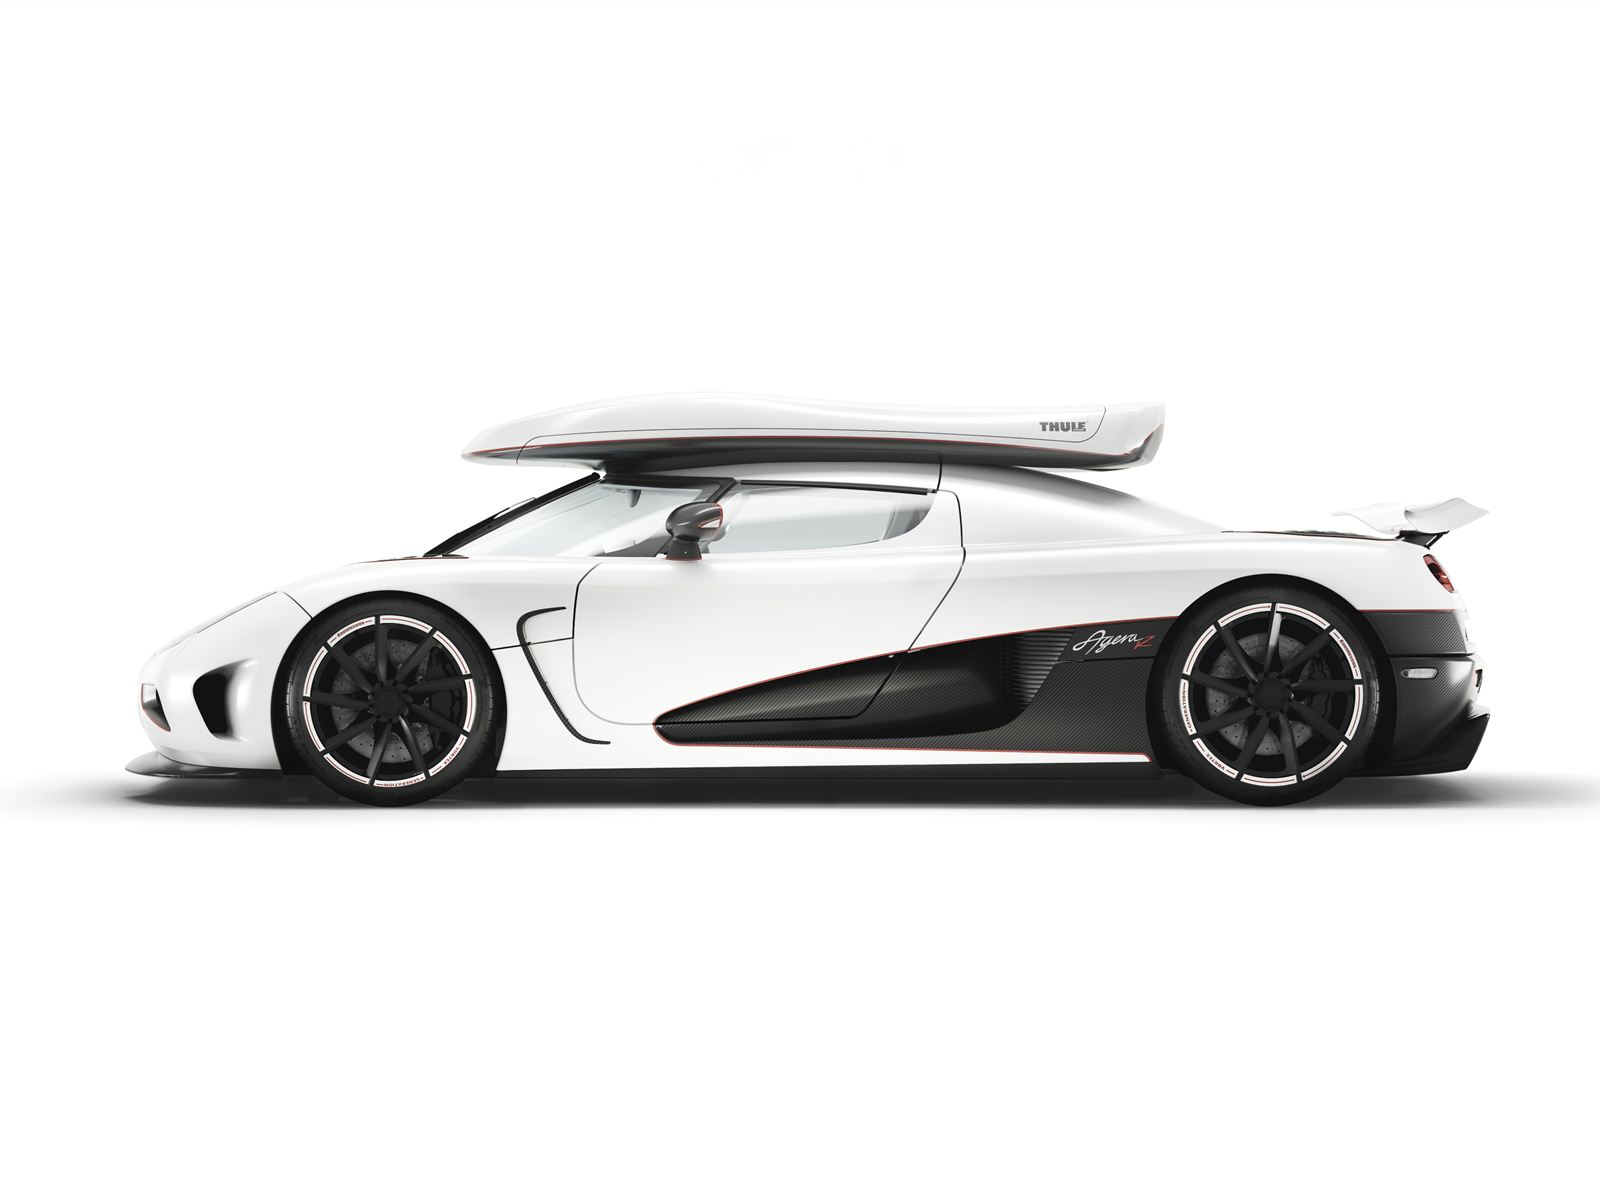 The Koenigsegg Agera R is a 2 door coupe with a starting MSRP of 1,611,000Top Speed 260 MPH, 0-60 2.9 in Seconds